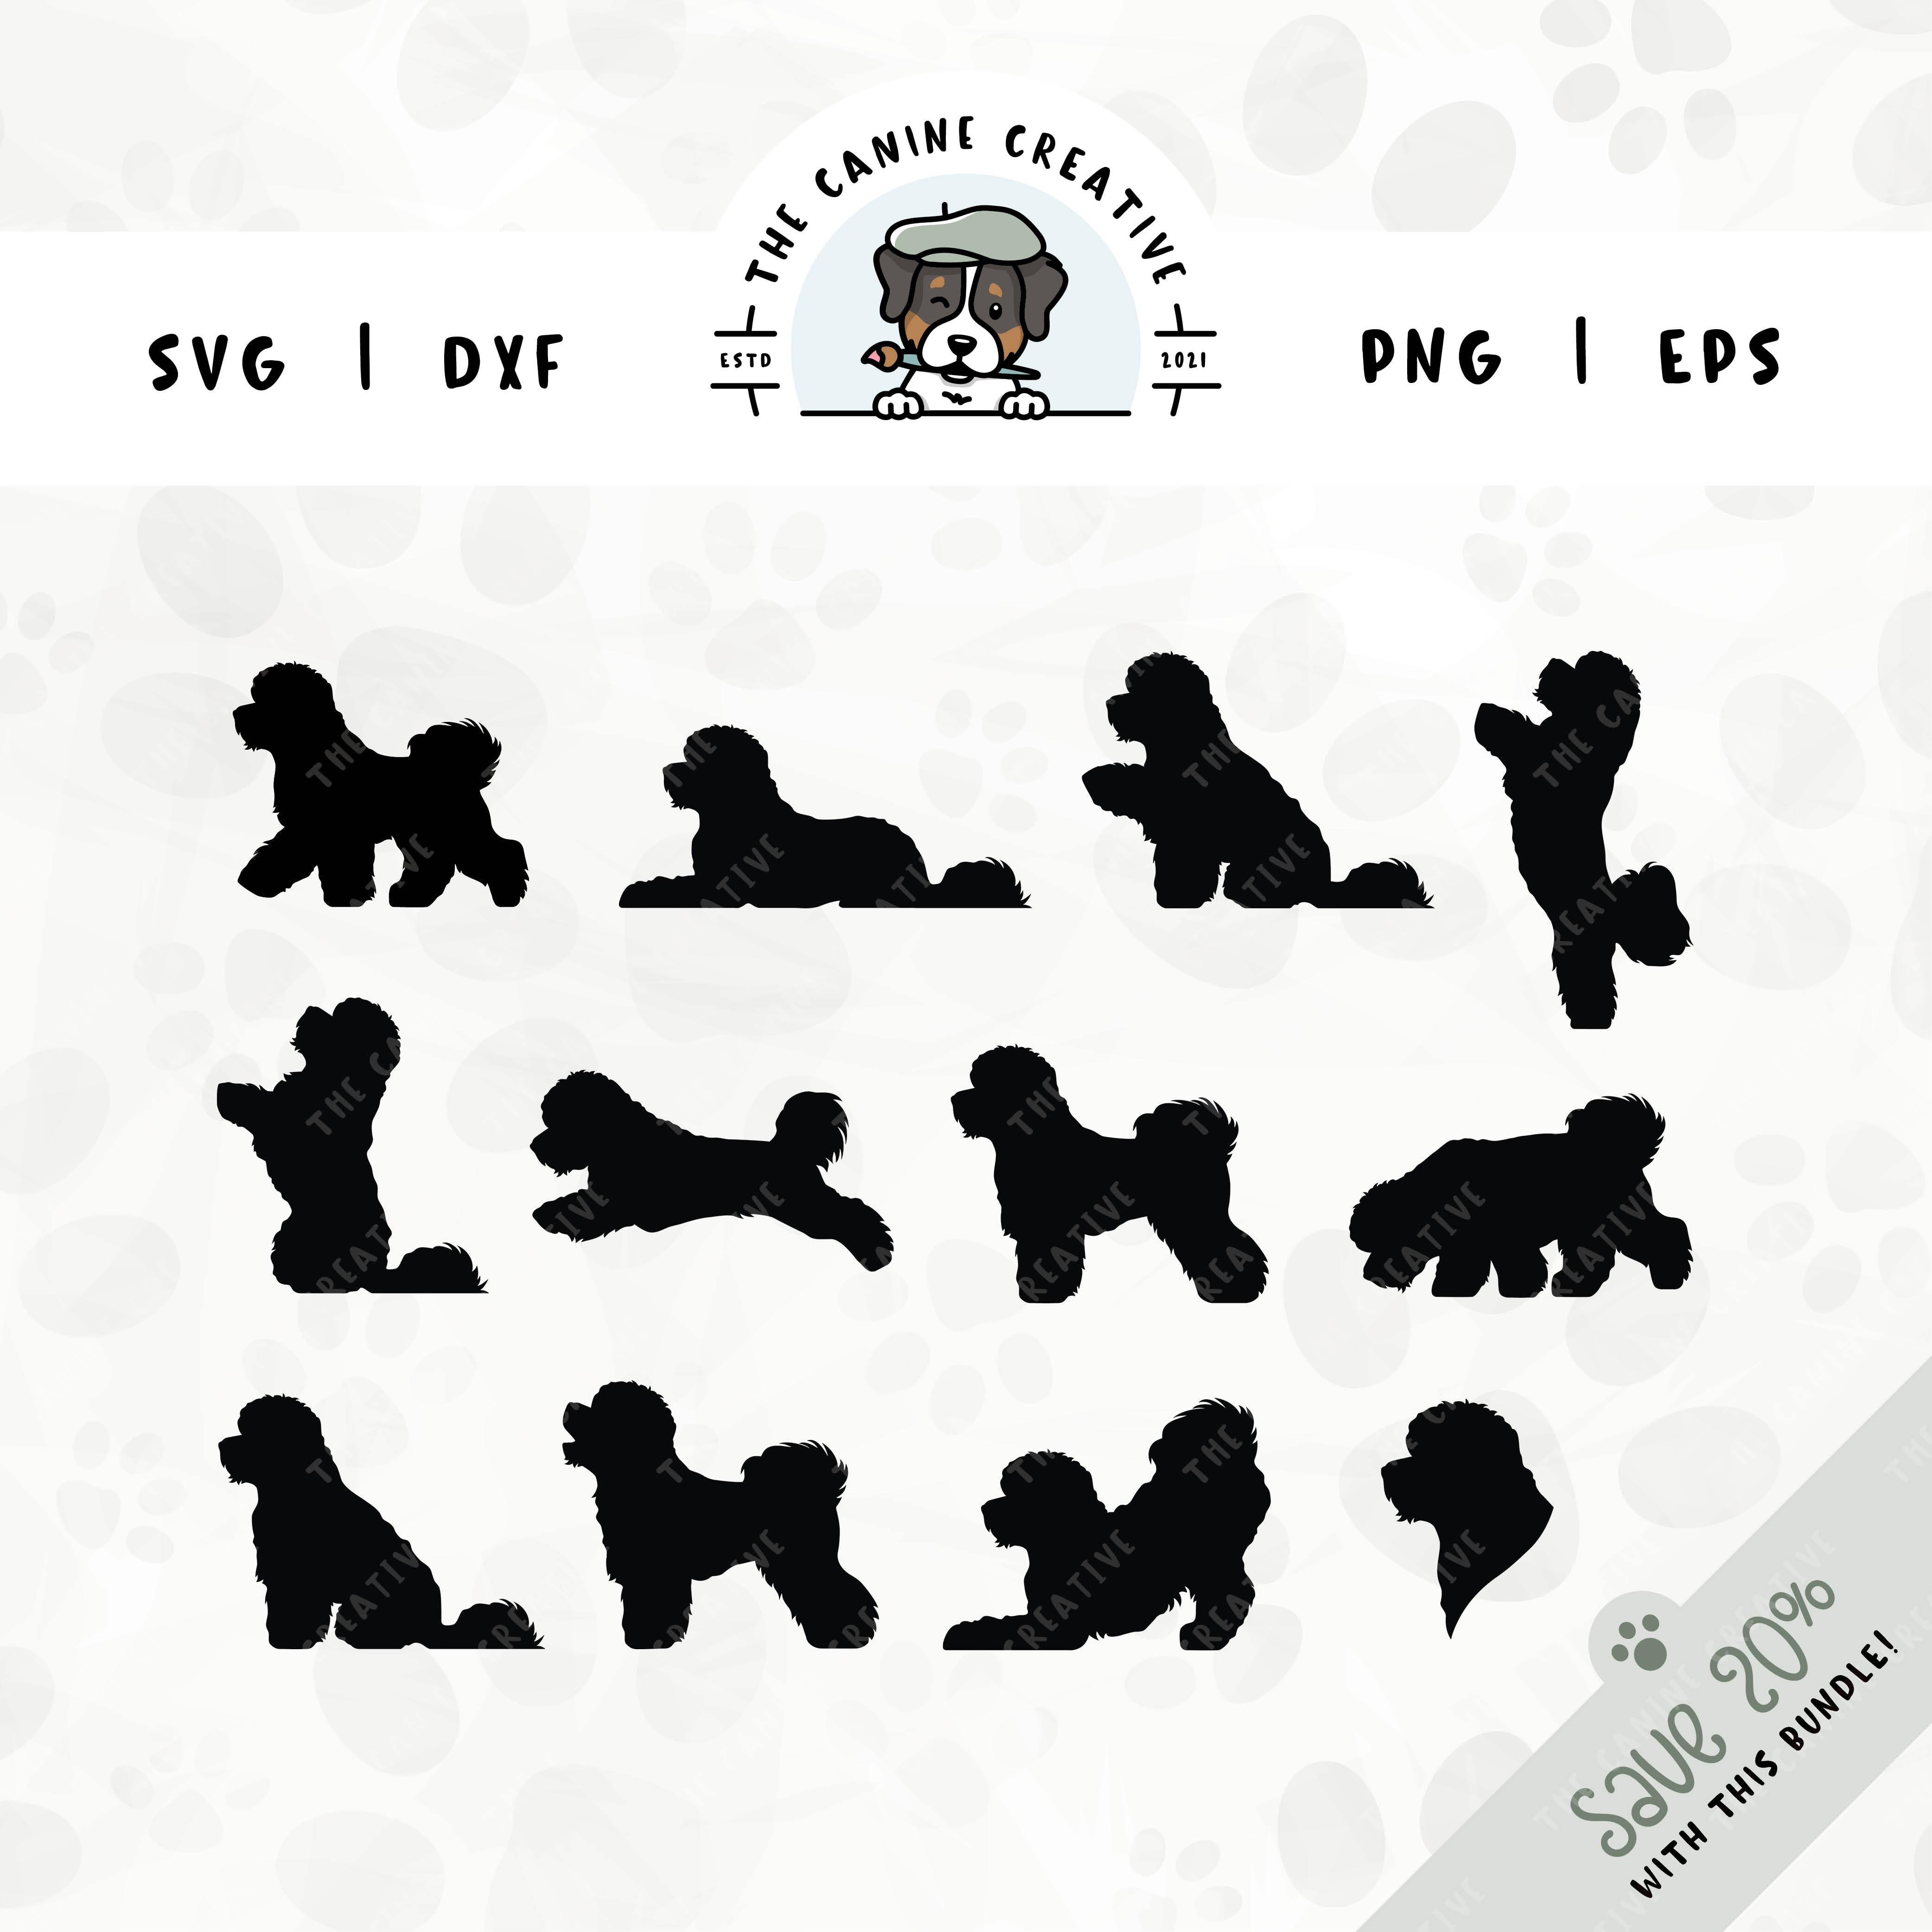 This 12-pack Bichon Frise silhouette bundle features a dog's head in profile, along with various poses including running, laying down, playing, standing, sitting, walking, jumping up, begging, barking, sniffing, and shaking a paw. File formats include: SVG, DXF, PNG, and EPS.